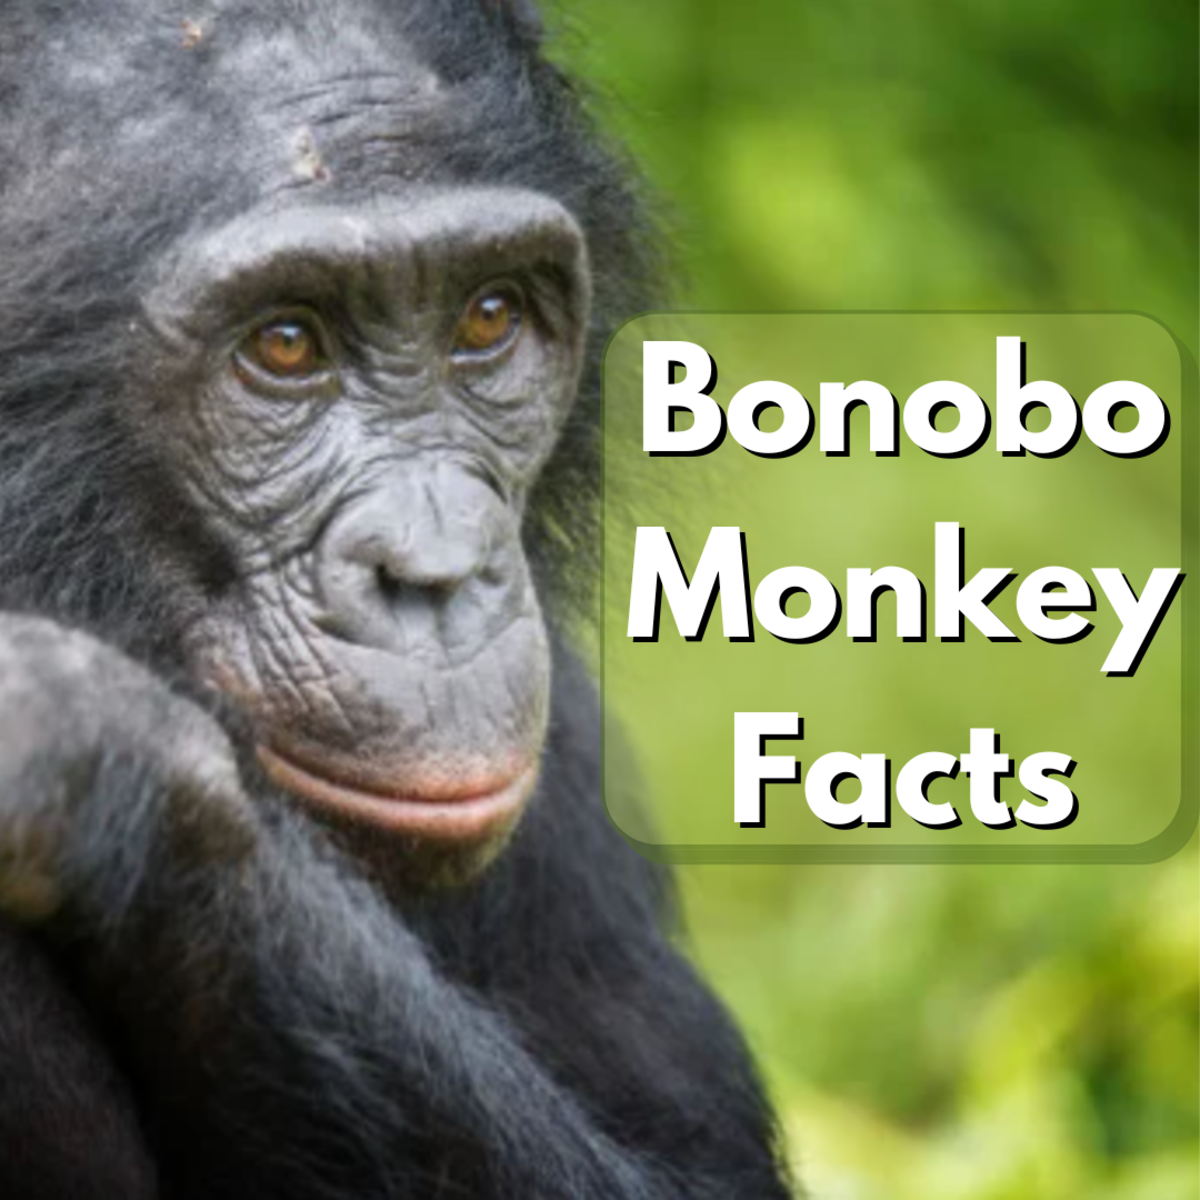 Read on to learn 5 facts about bonobo monkeys, the closest genetic relative to human beings.